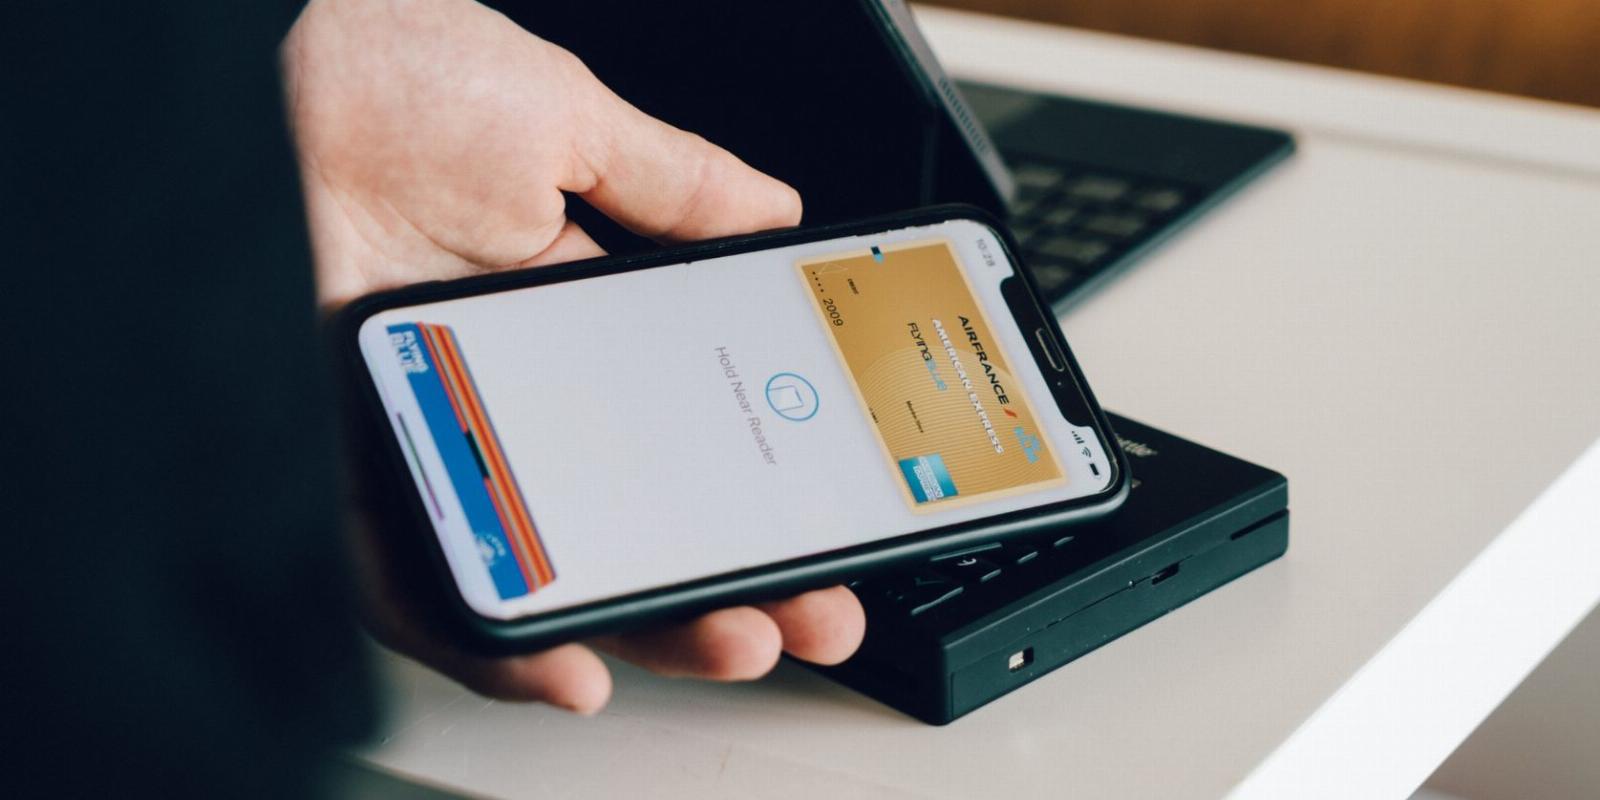 6 NFC Payment Myths Debunked For Good